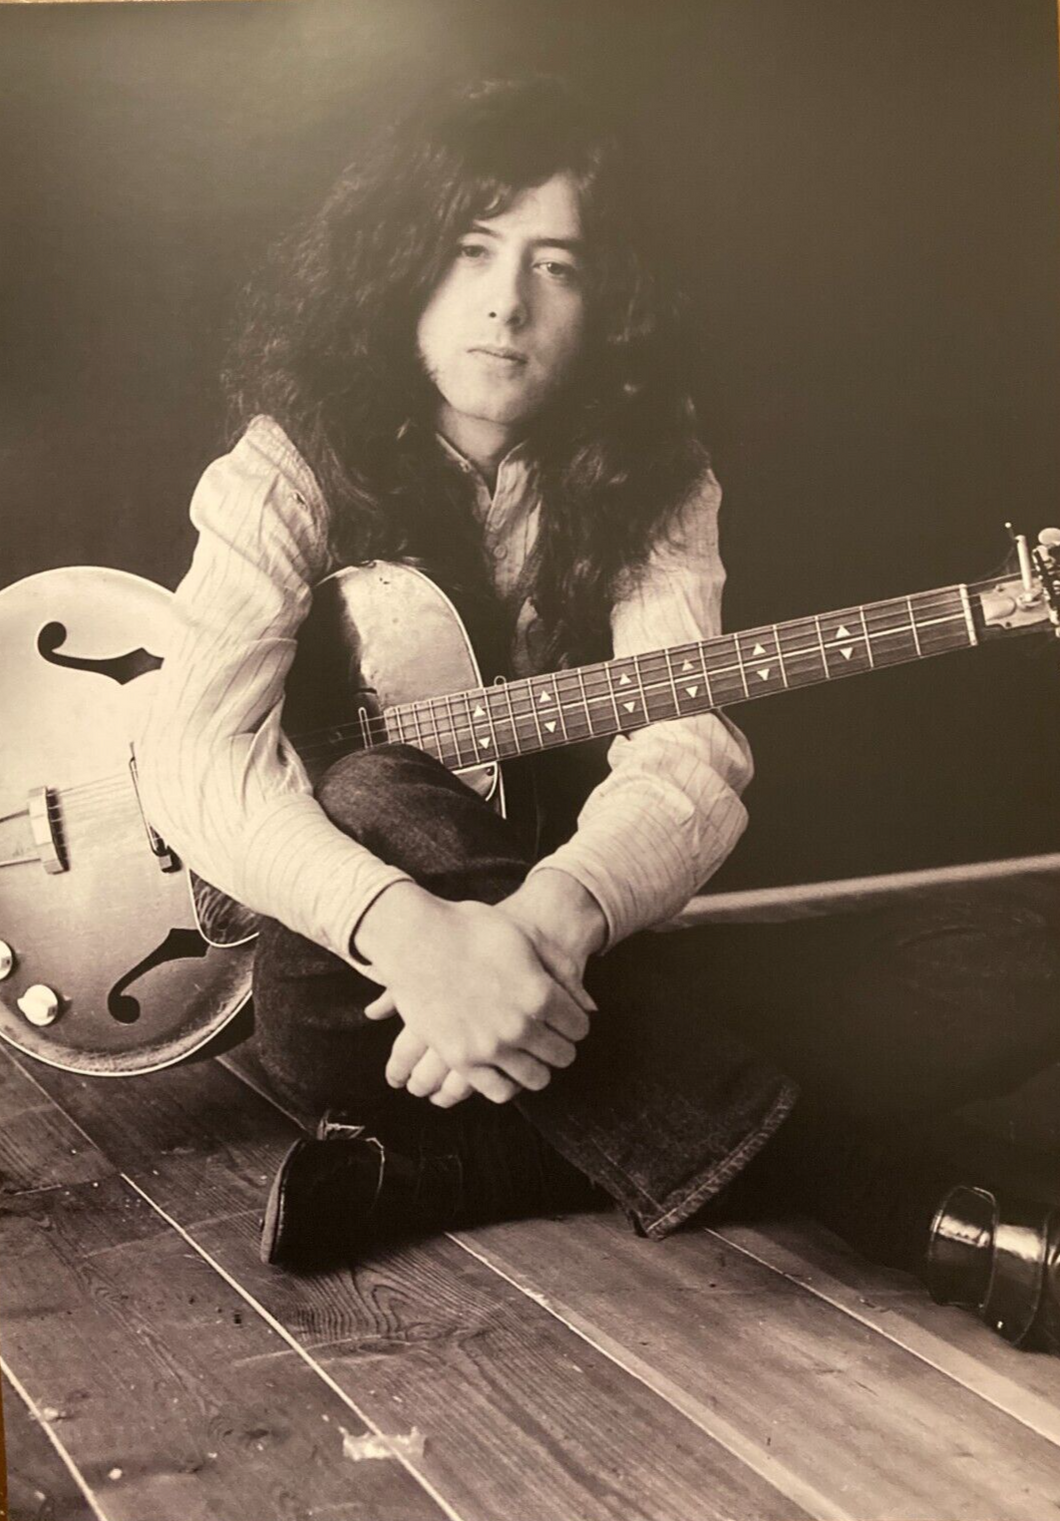 Led Zeppelin poster photo -Jimmy Page A3 size repro from original files/negative - Original Music and Movie Posters for sale from Bamalama - Online Poster Store UK London